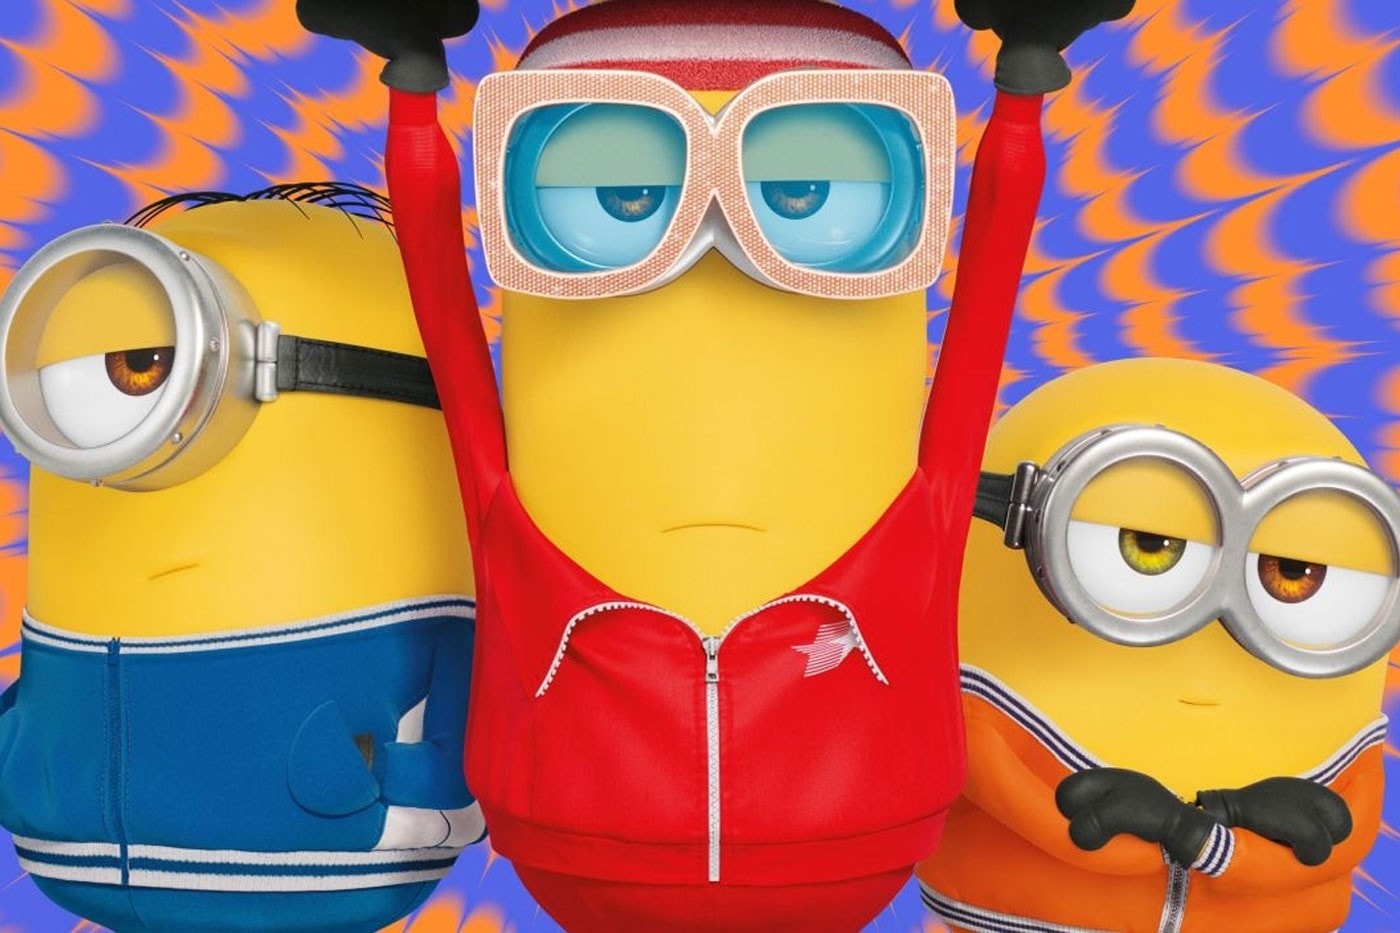 Minions The Rise of Gru gentleminions TikTok Viral Trend Suits Banned in Cinemas News